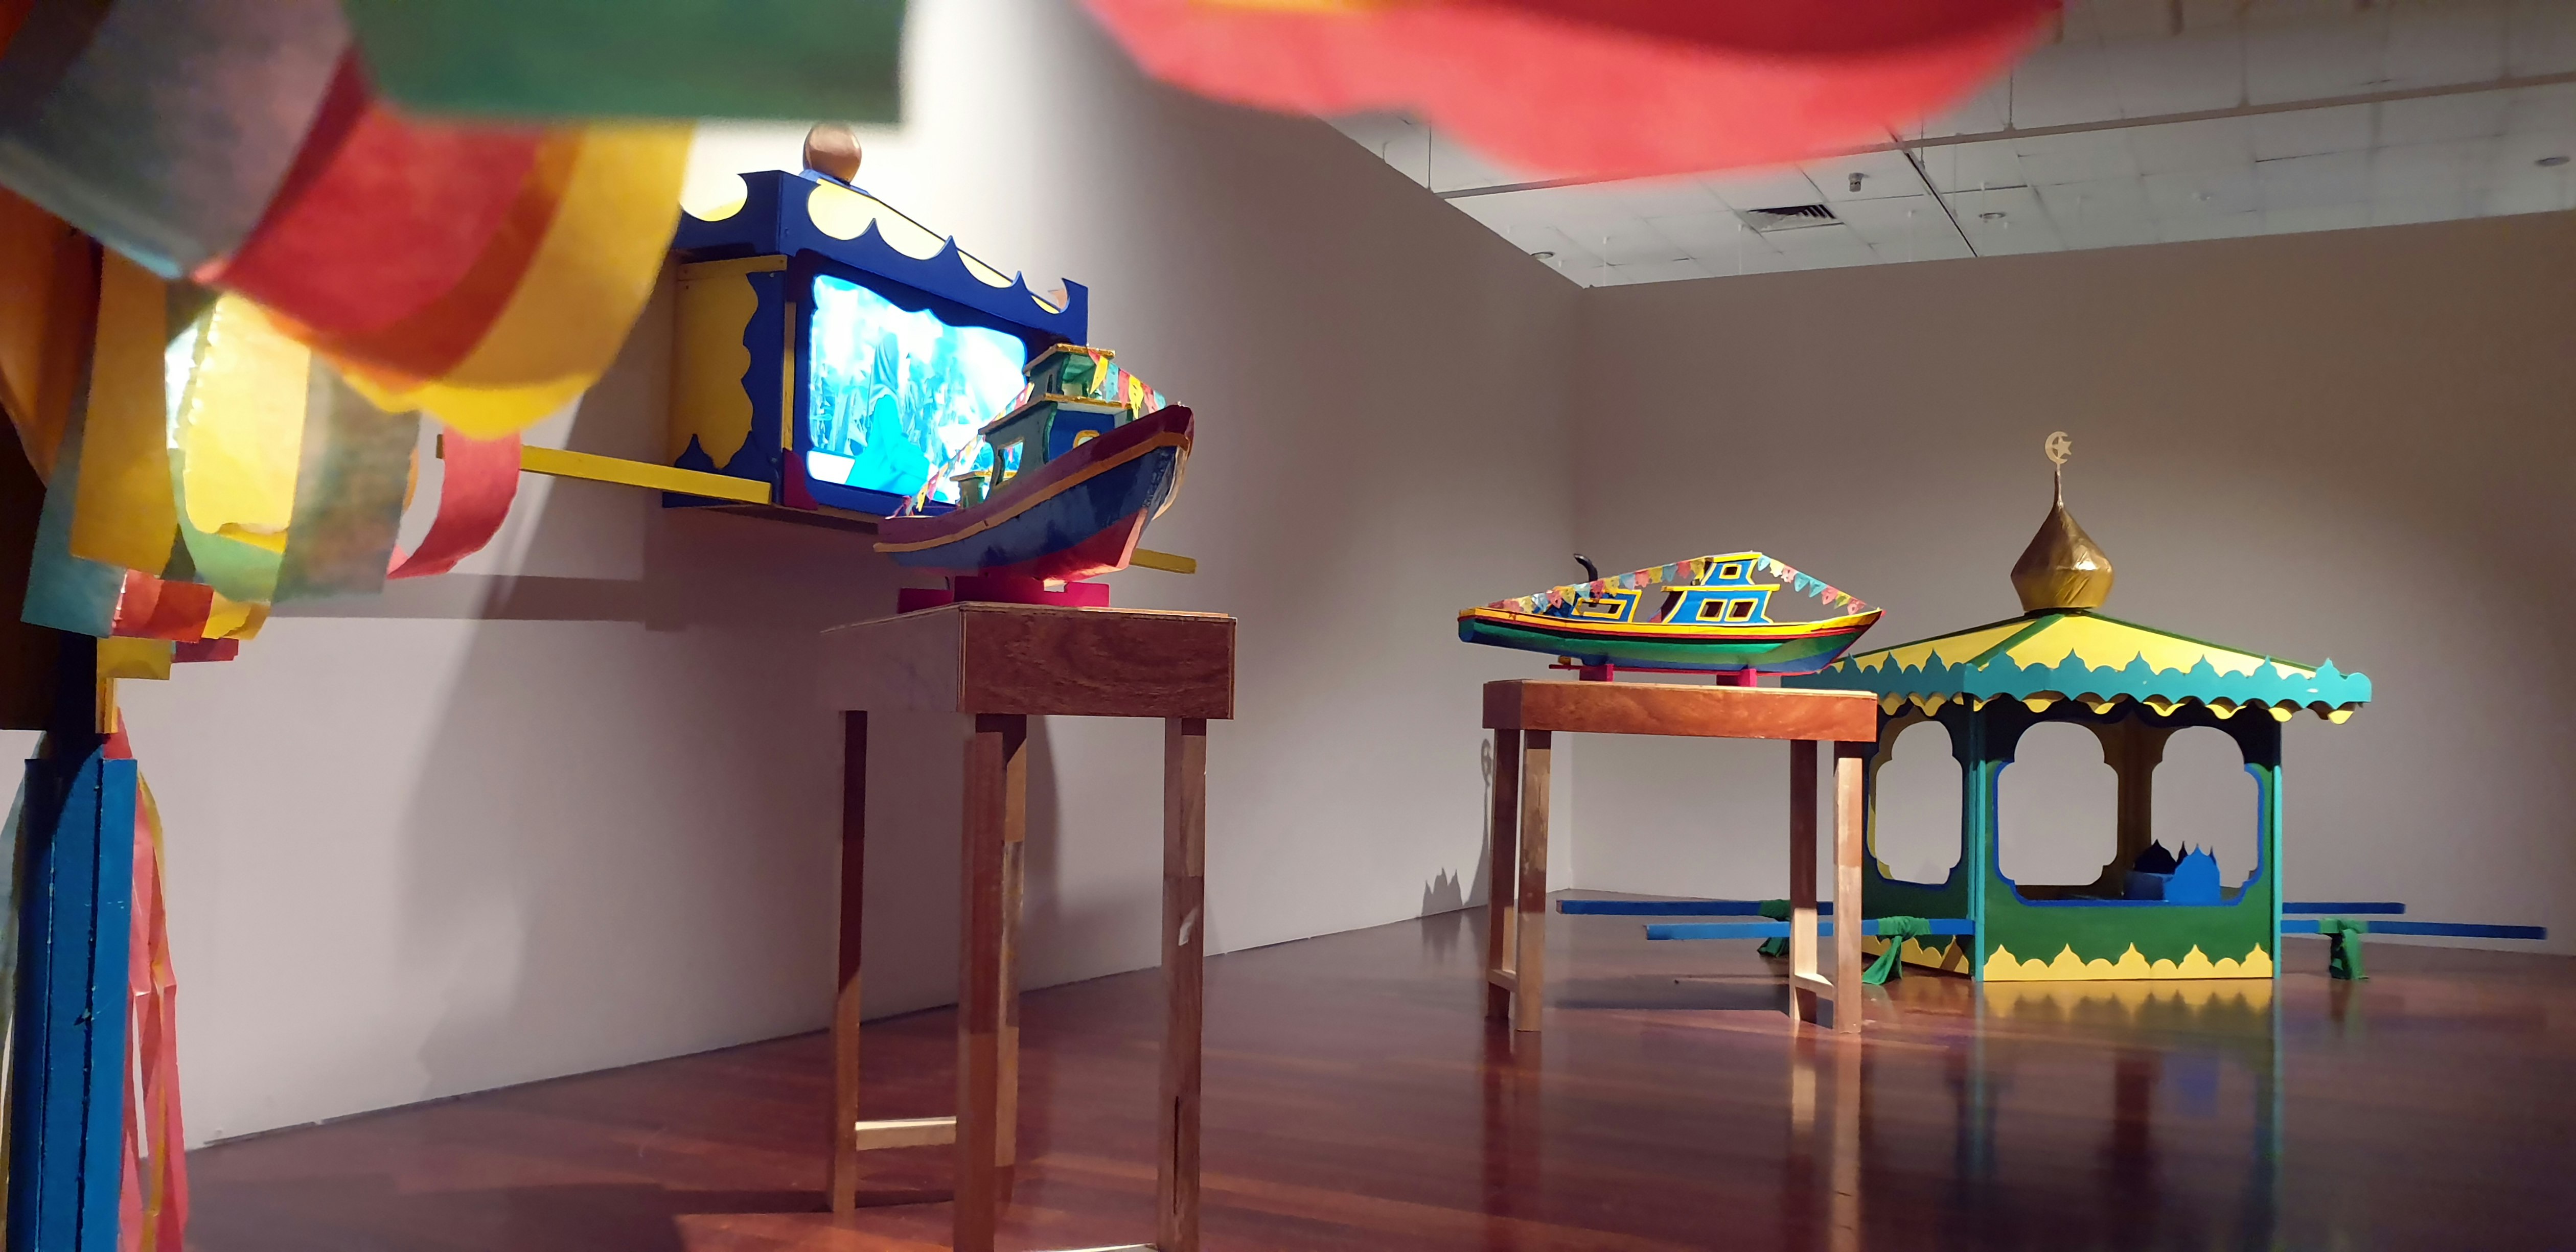 Colourful and wooden structures placed in a gallery. 